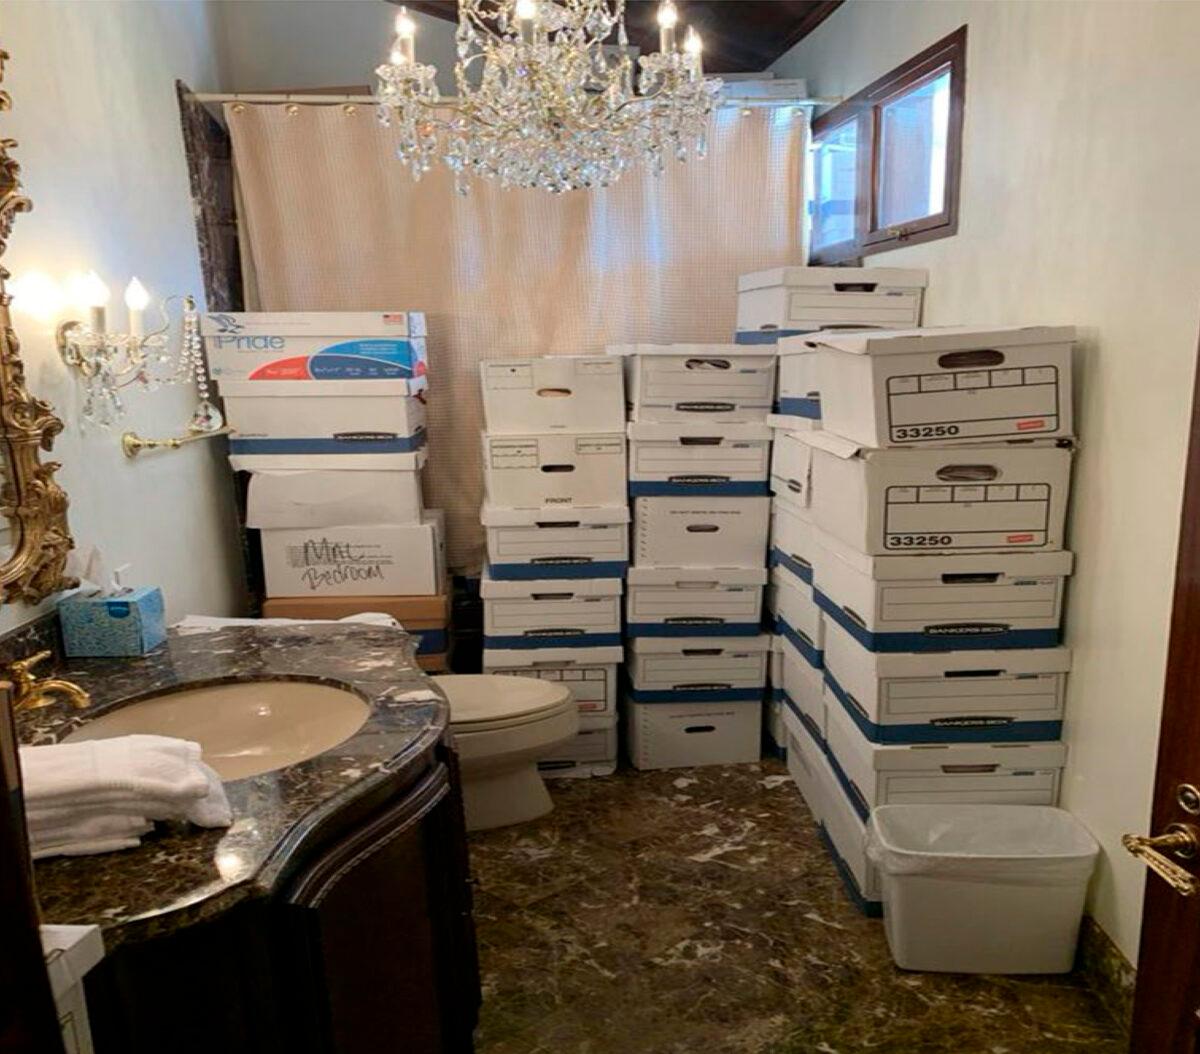 This image, contained in the indictment against former President Donald Trump, shows boxes of records stored in a bathroom at Trump's Mar-a-Lago estate in Palm Beach, Fla. (Department of Justice via AP)